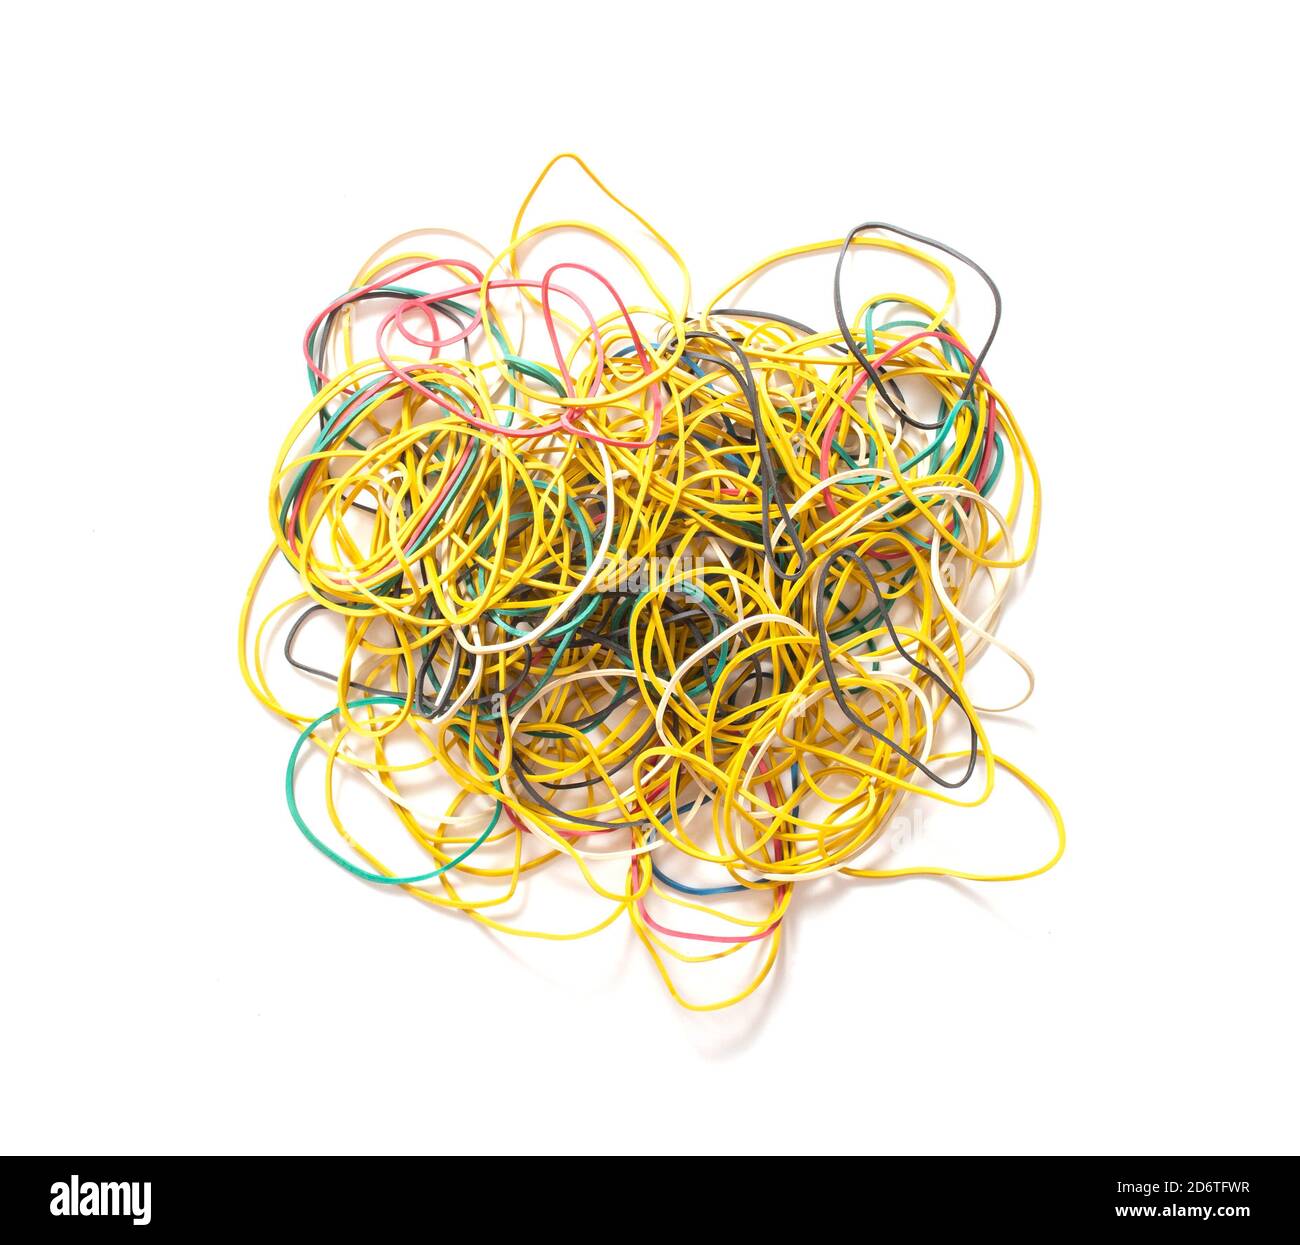 Many multi-colored rubber bands for money on a white background, isolate. Stationery concept, colorful Stock Photo